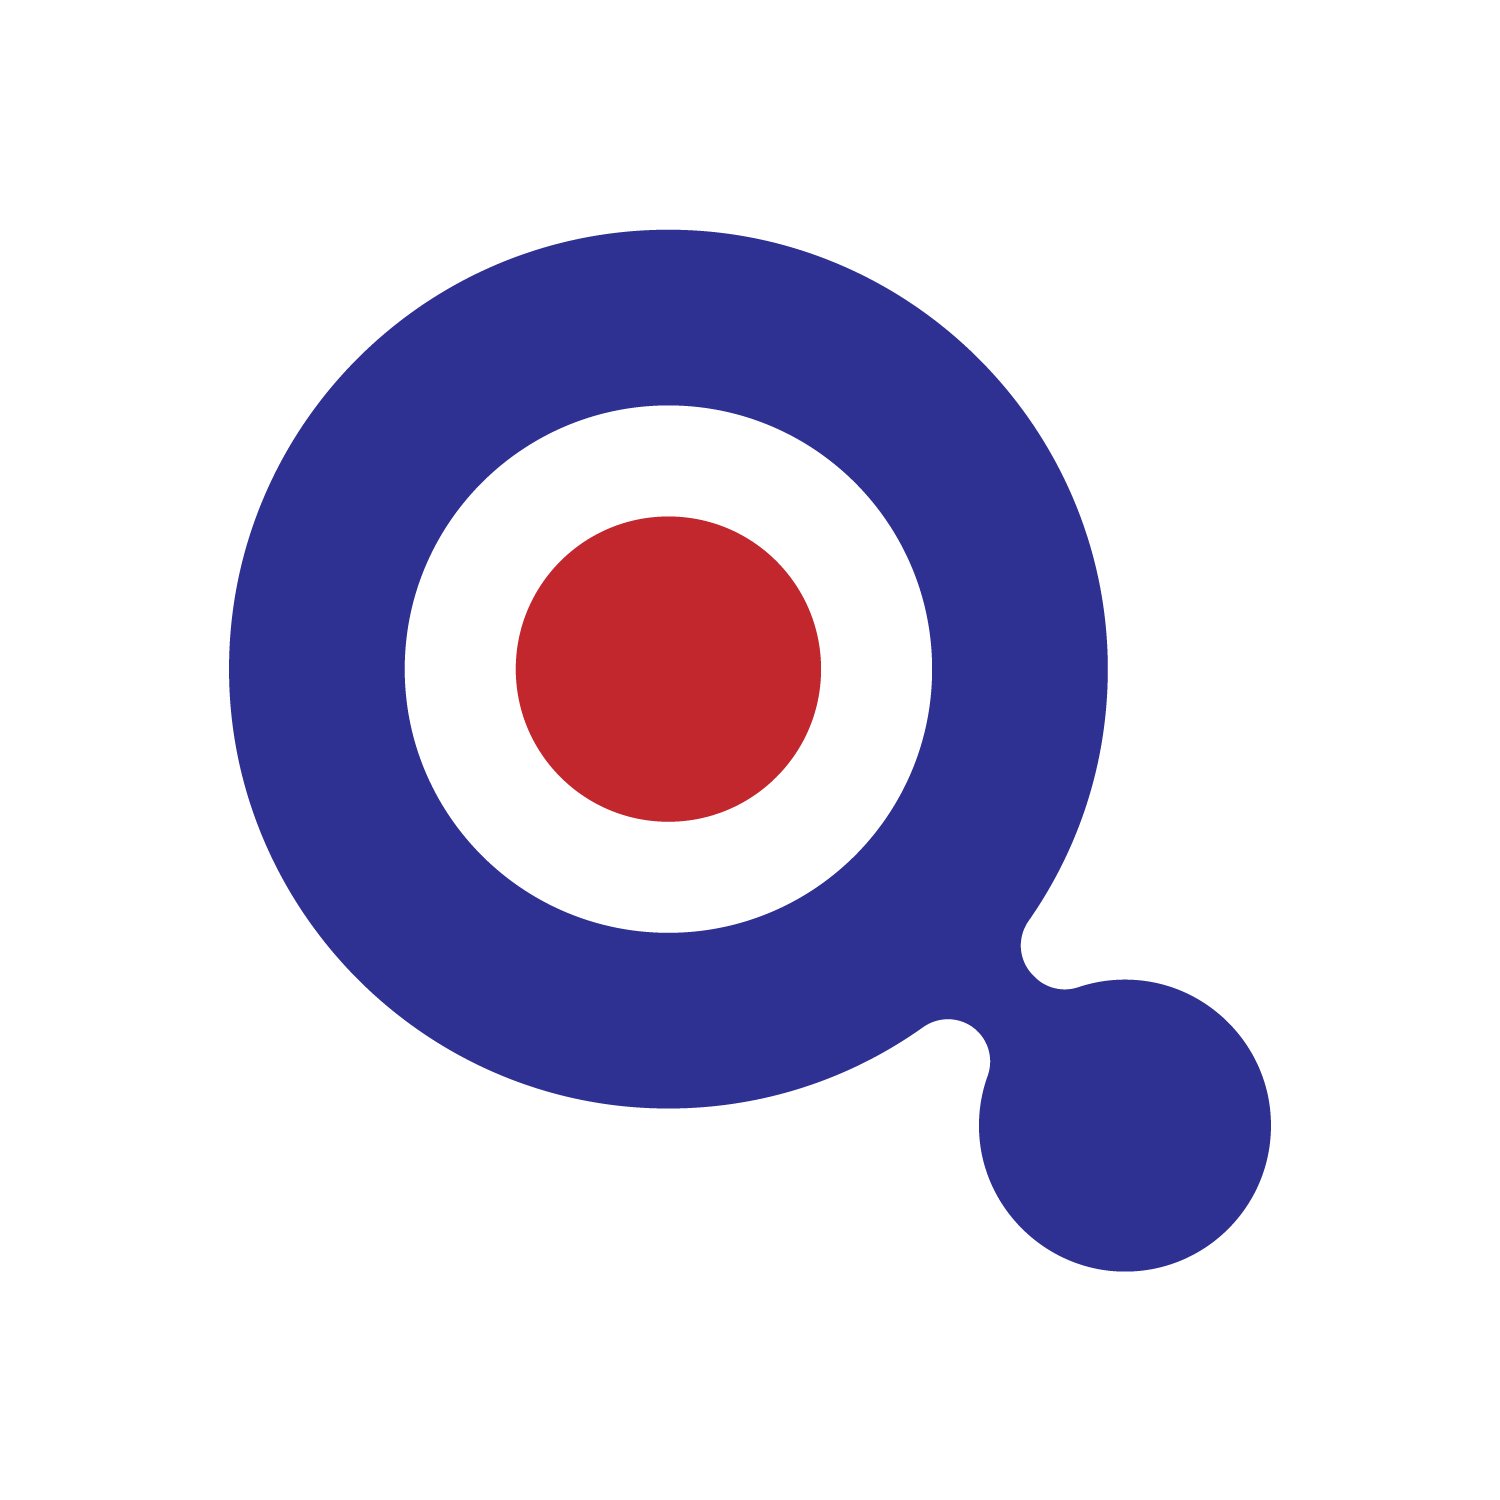 Website detailing the history of britpop, the bands from that era and their associated acts